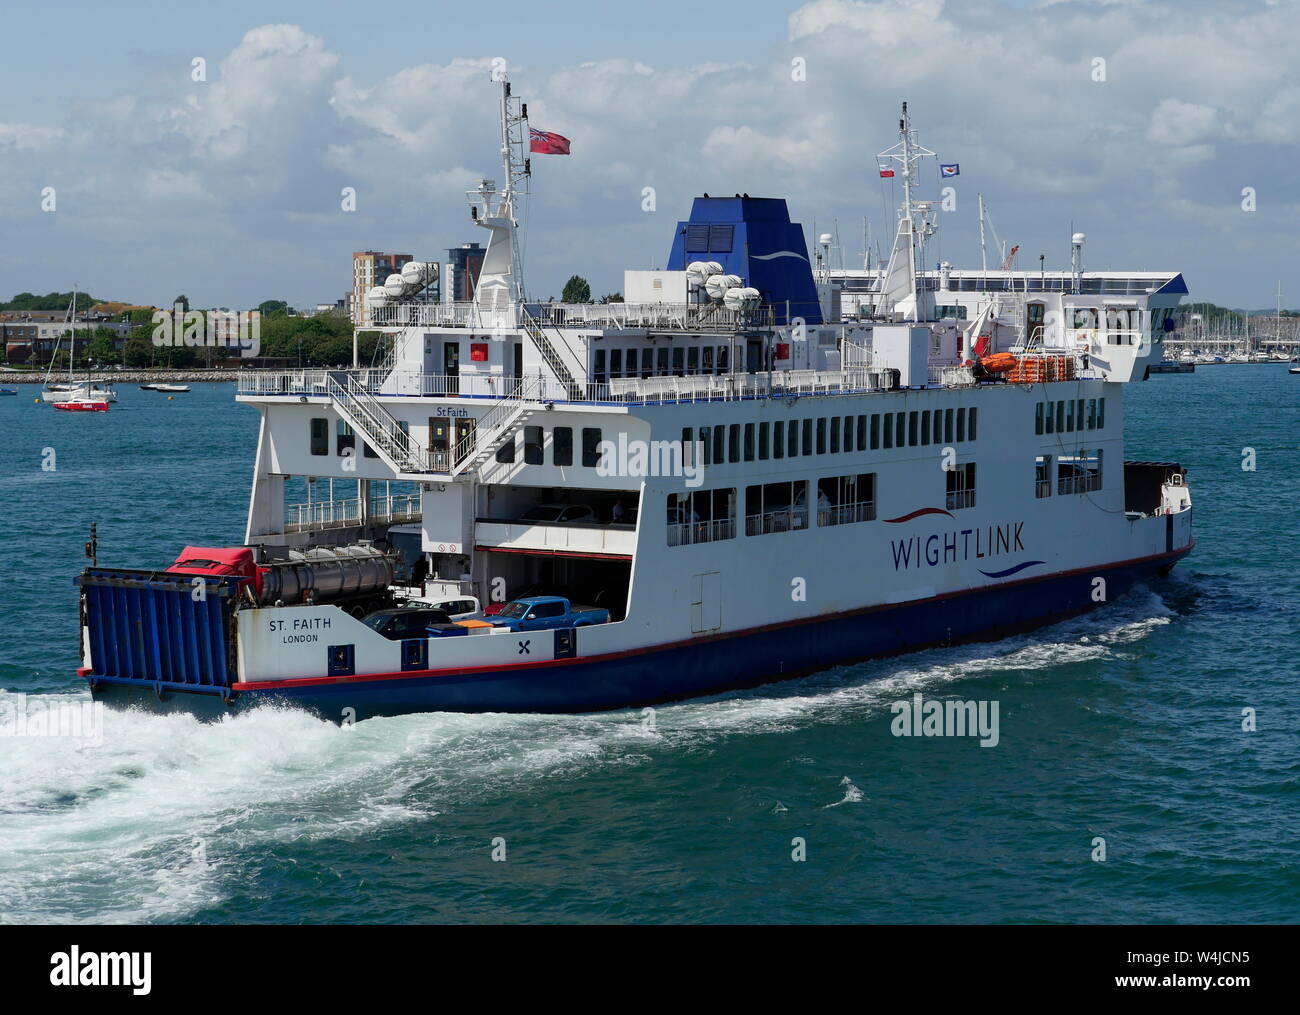 AJAXNETPHOTO. 3RD JUNE, 2019.  PORTSMOUTH, ENGLAND - PORTSMOUTH TO ISLE OF WIGHT WIGHT LINK ST.FAITH ENTERING HARBOUR. PHOTO:JONATHAN EASTLAND/AJAX REF:GX8 190306 321 Stock Photo